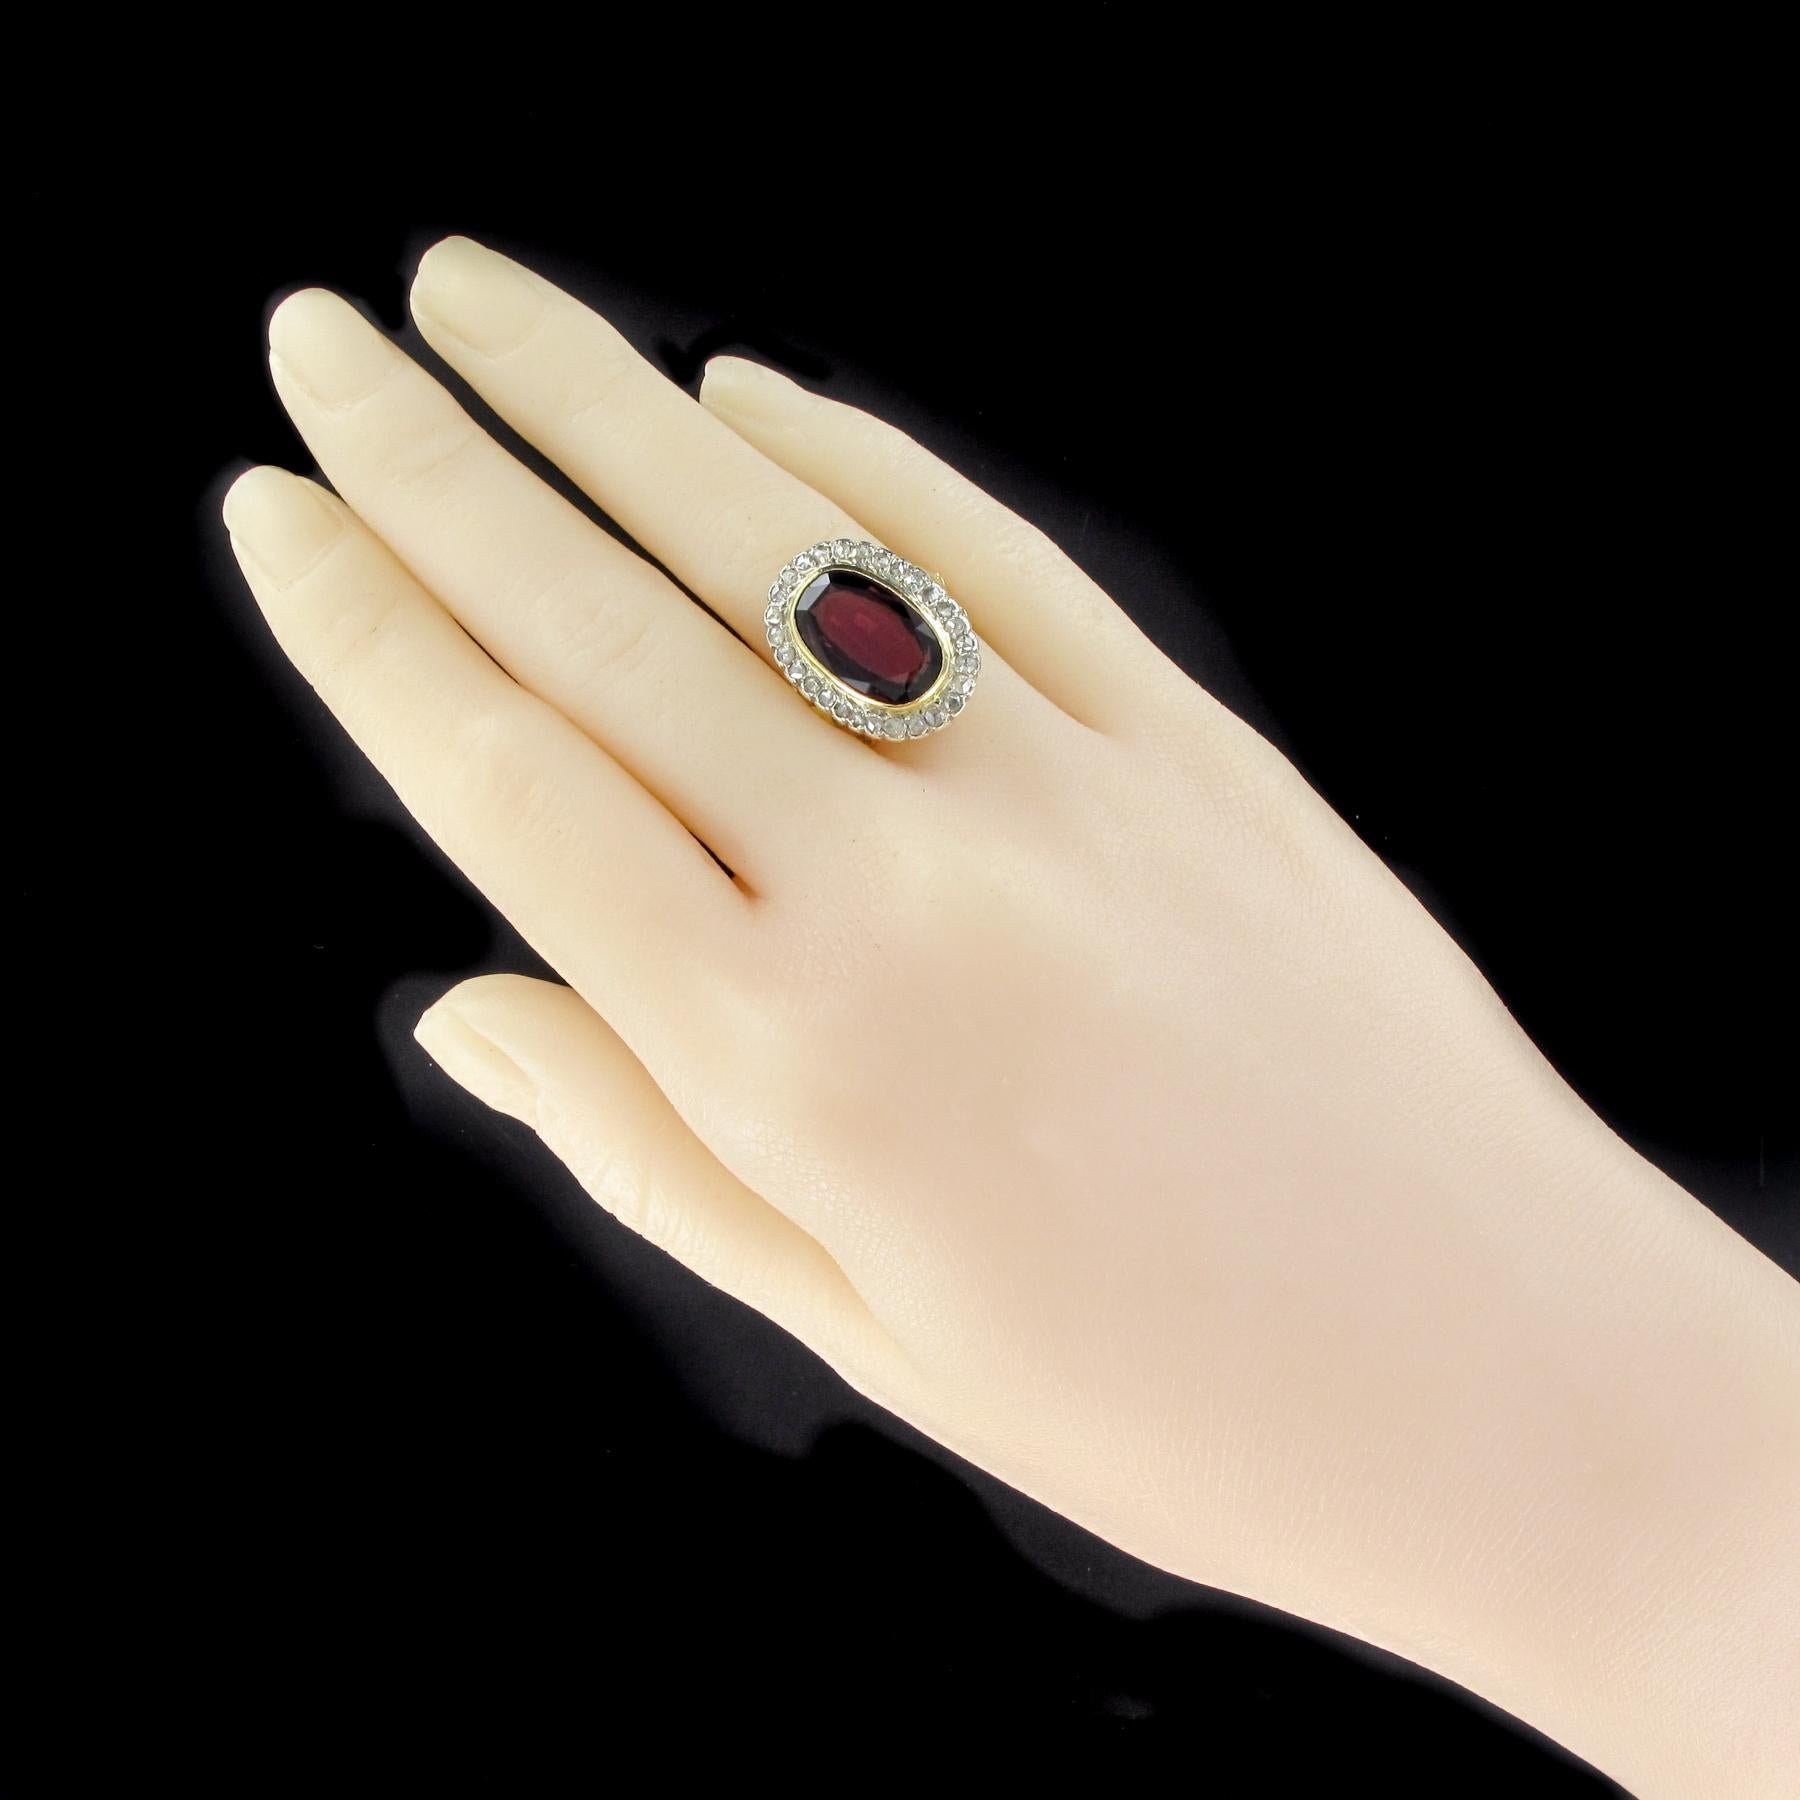 Ring in 18 karats yellow gold, eagle's head hallmark.
This voluminous antique ring is set in the center of an oval garnet in an entourage of rose-cut diamonds. The start of the ring is formed on either side of a lily flower.
Total weight of garnet: